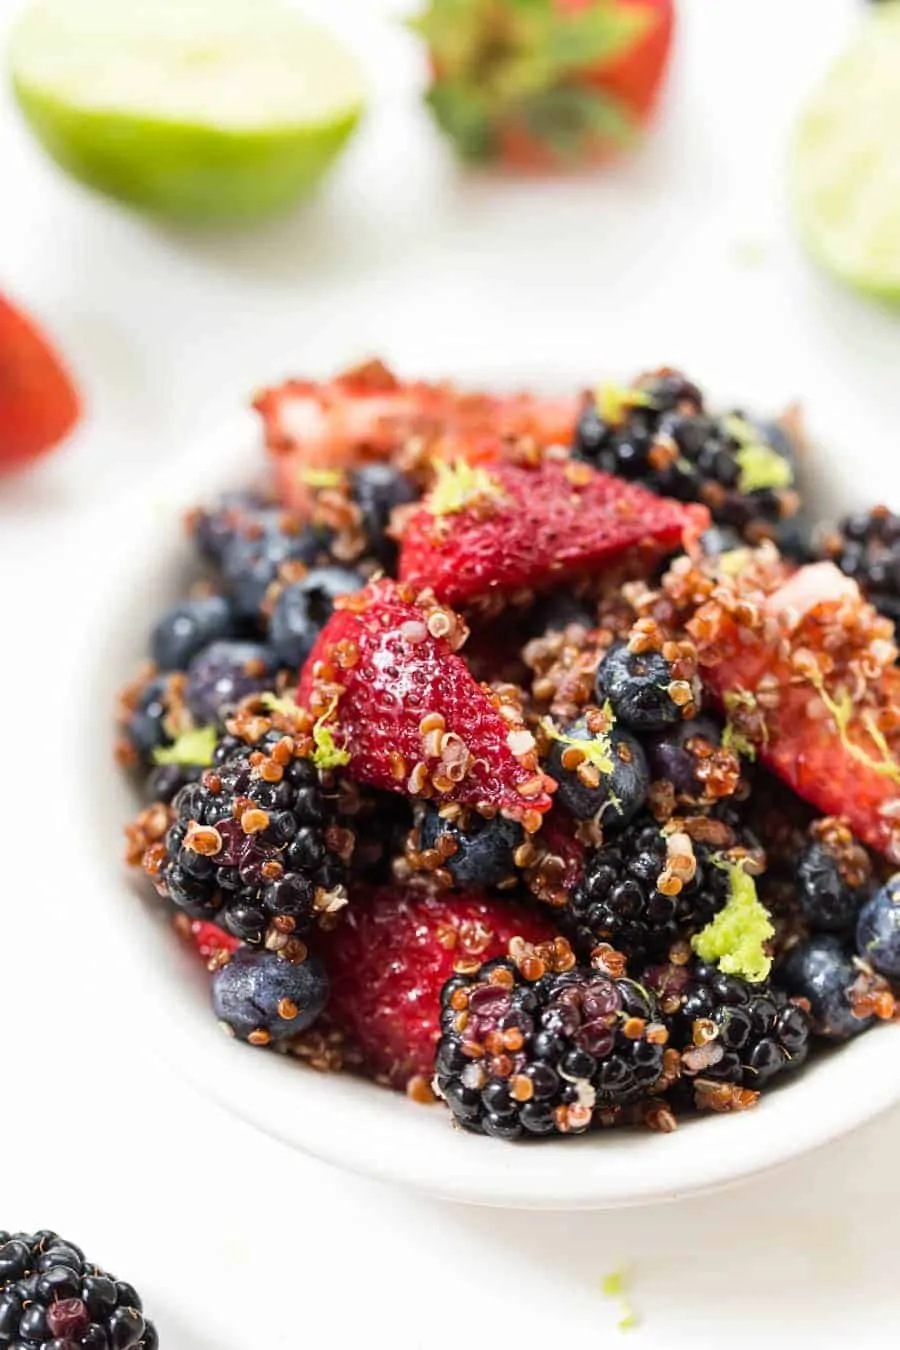 This AMAZING Triple Berry Quinoa Salad is made in under 10 minutes, with only 7 ingredients AND it's naturally GF & VEGAN!